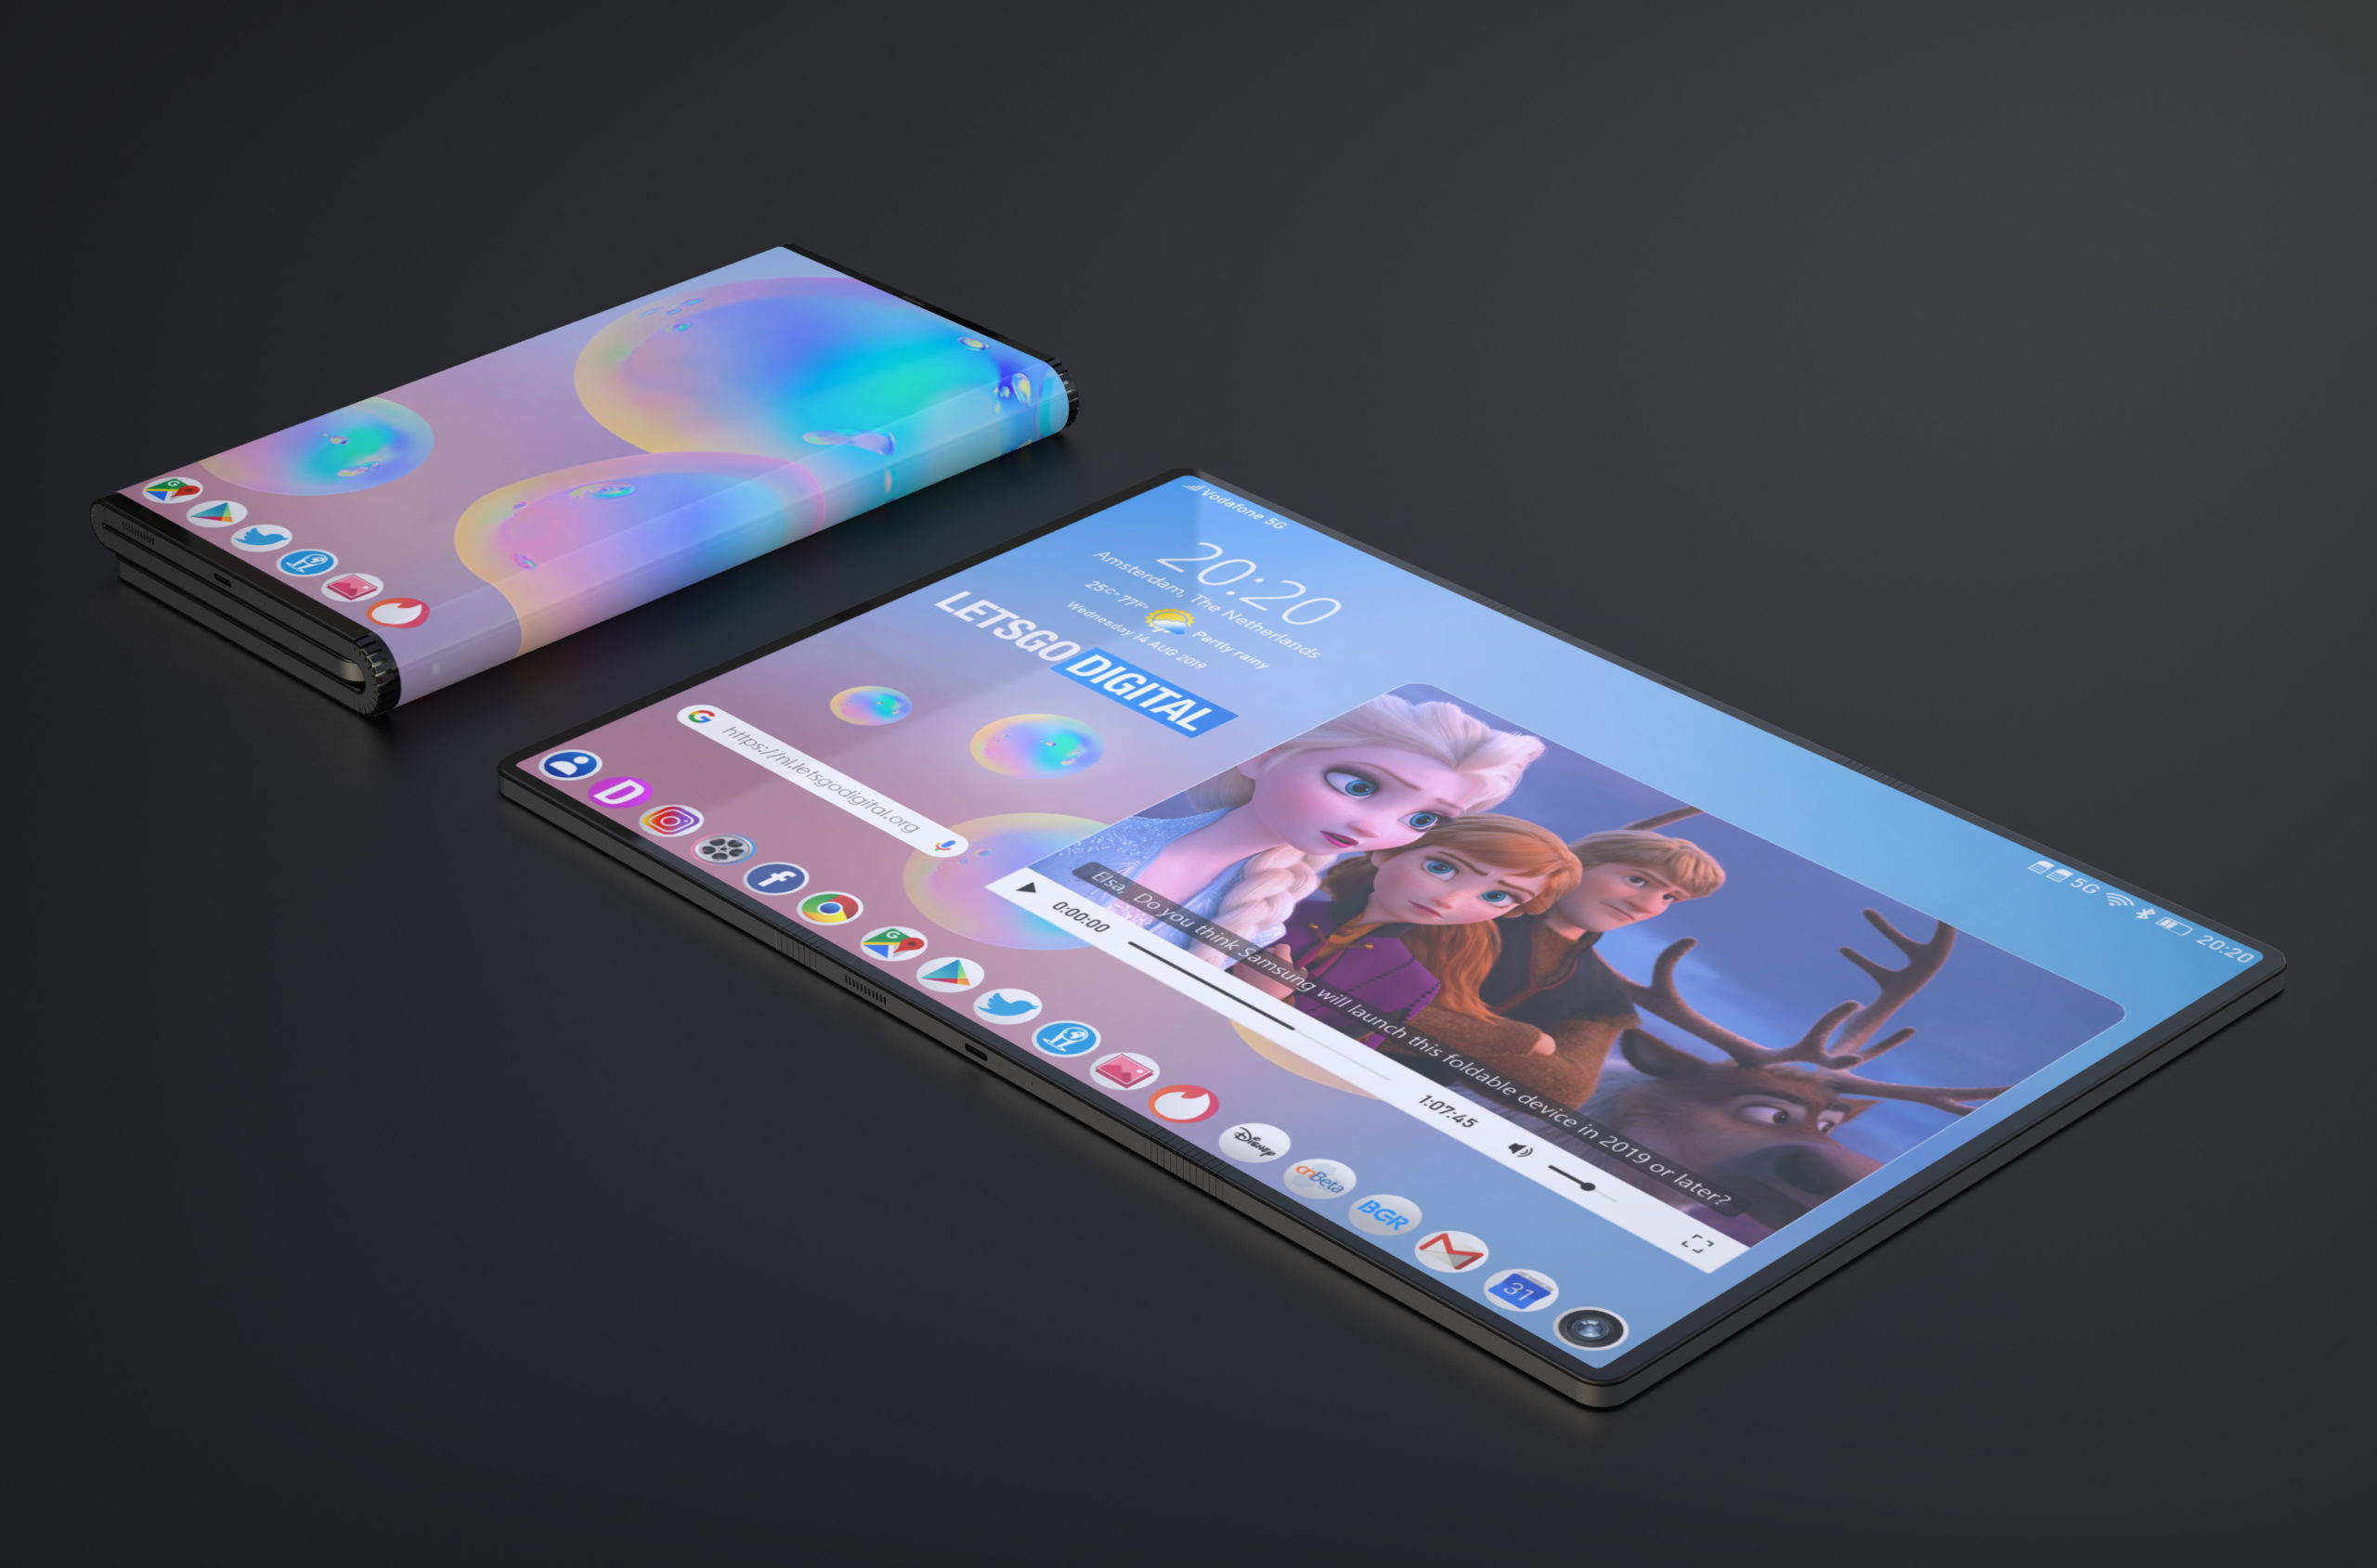 foldable devices